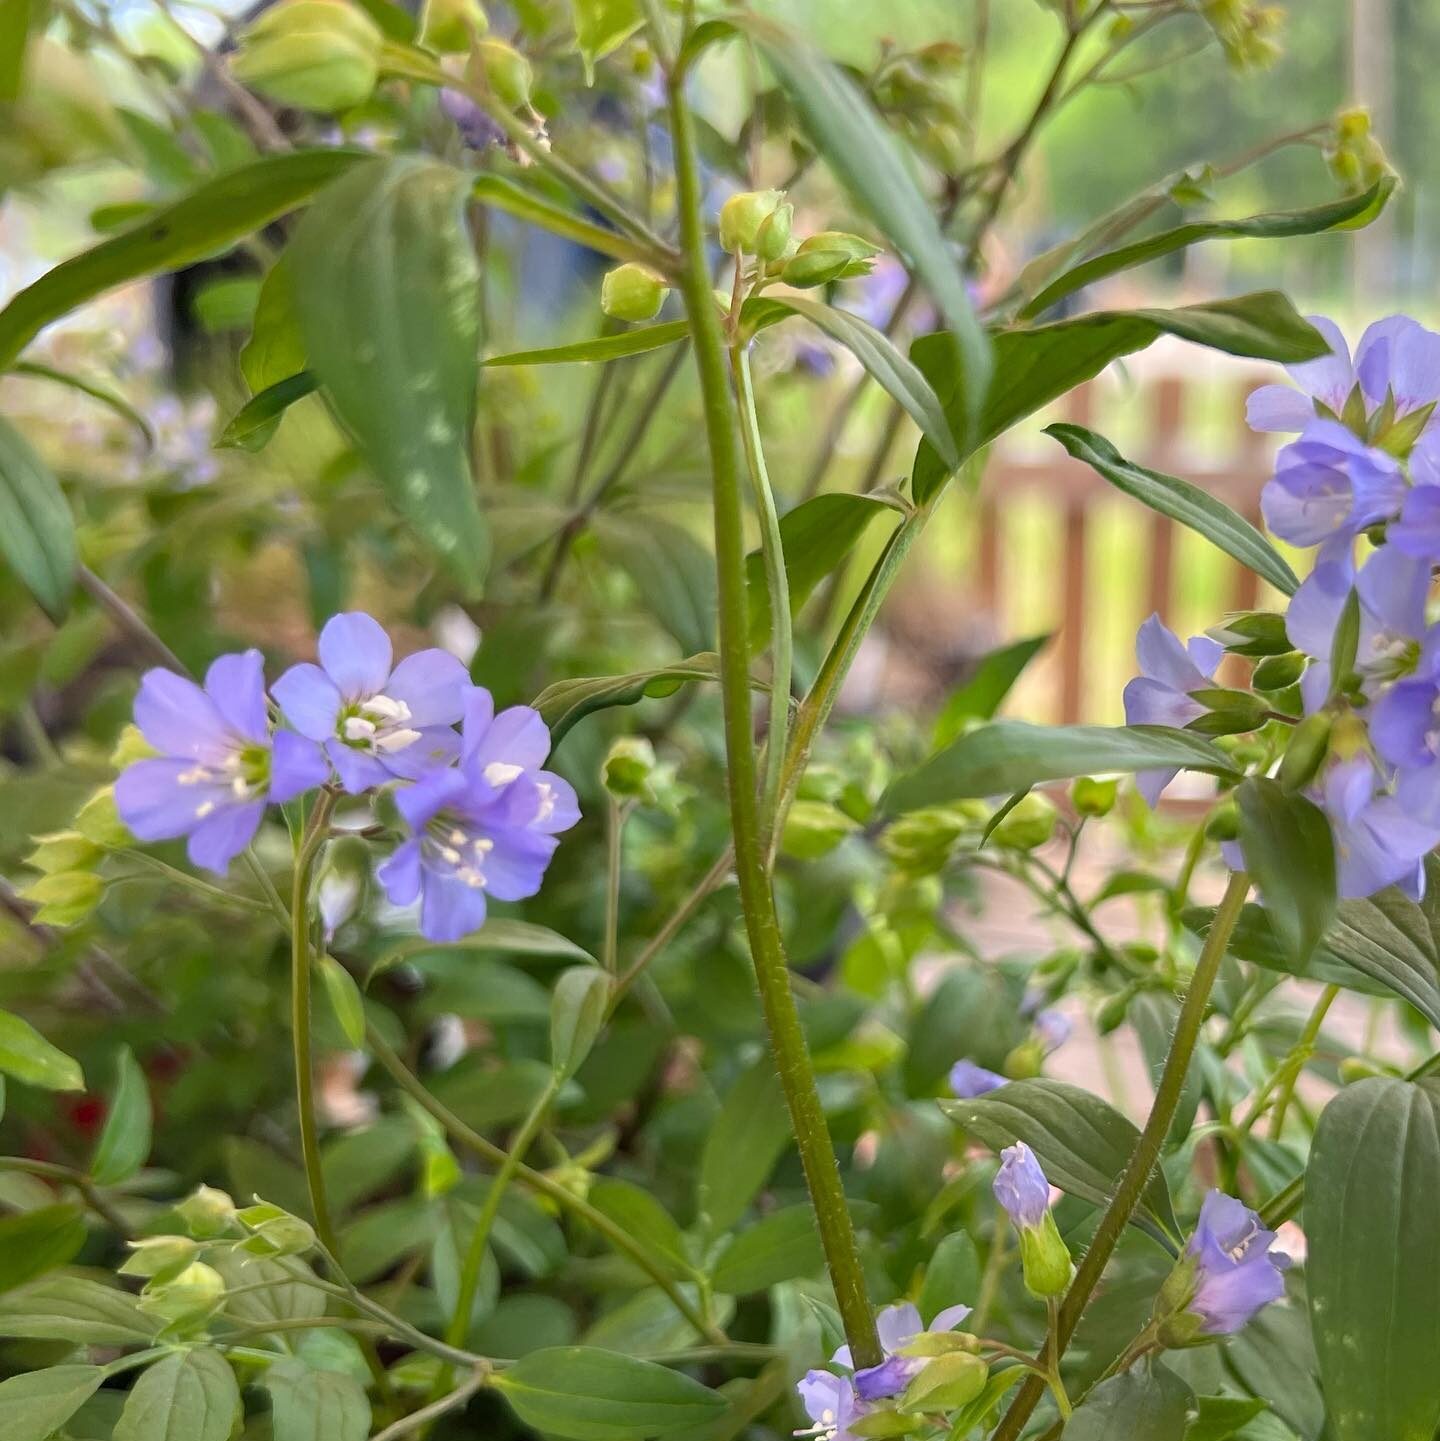 Close up picture of lilac-colored Jacob's Ladder with green stems and leaves.